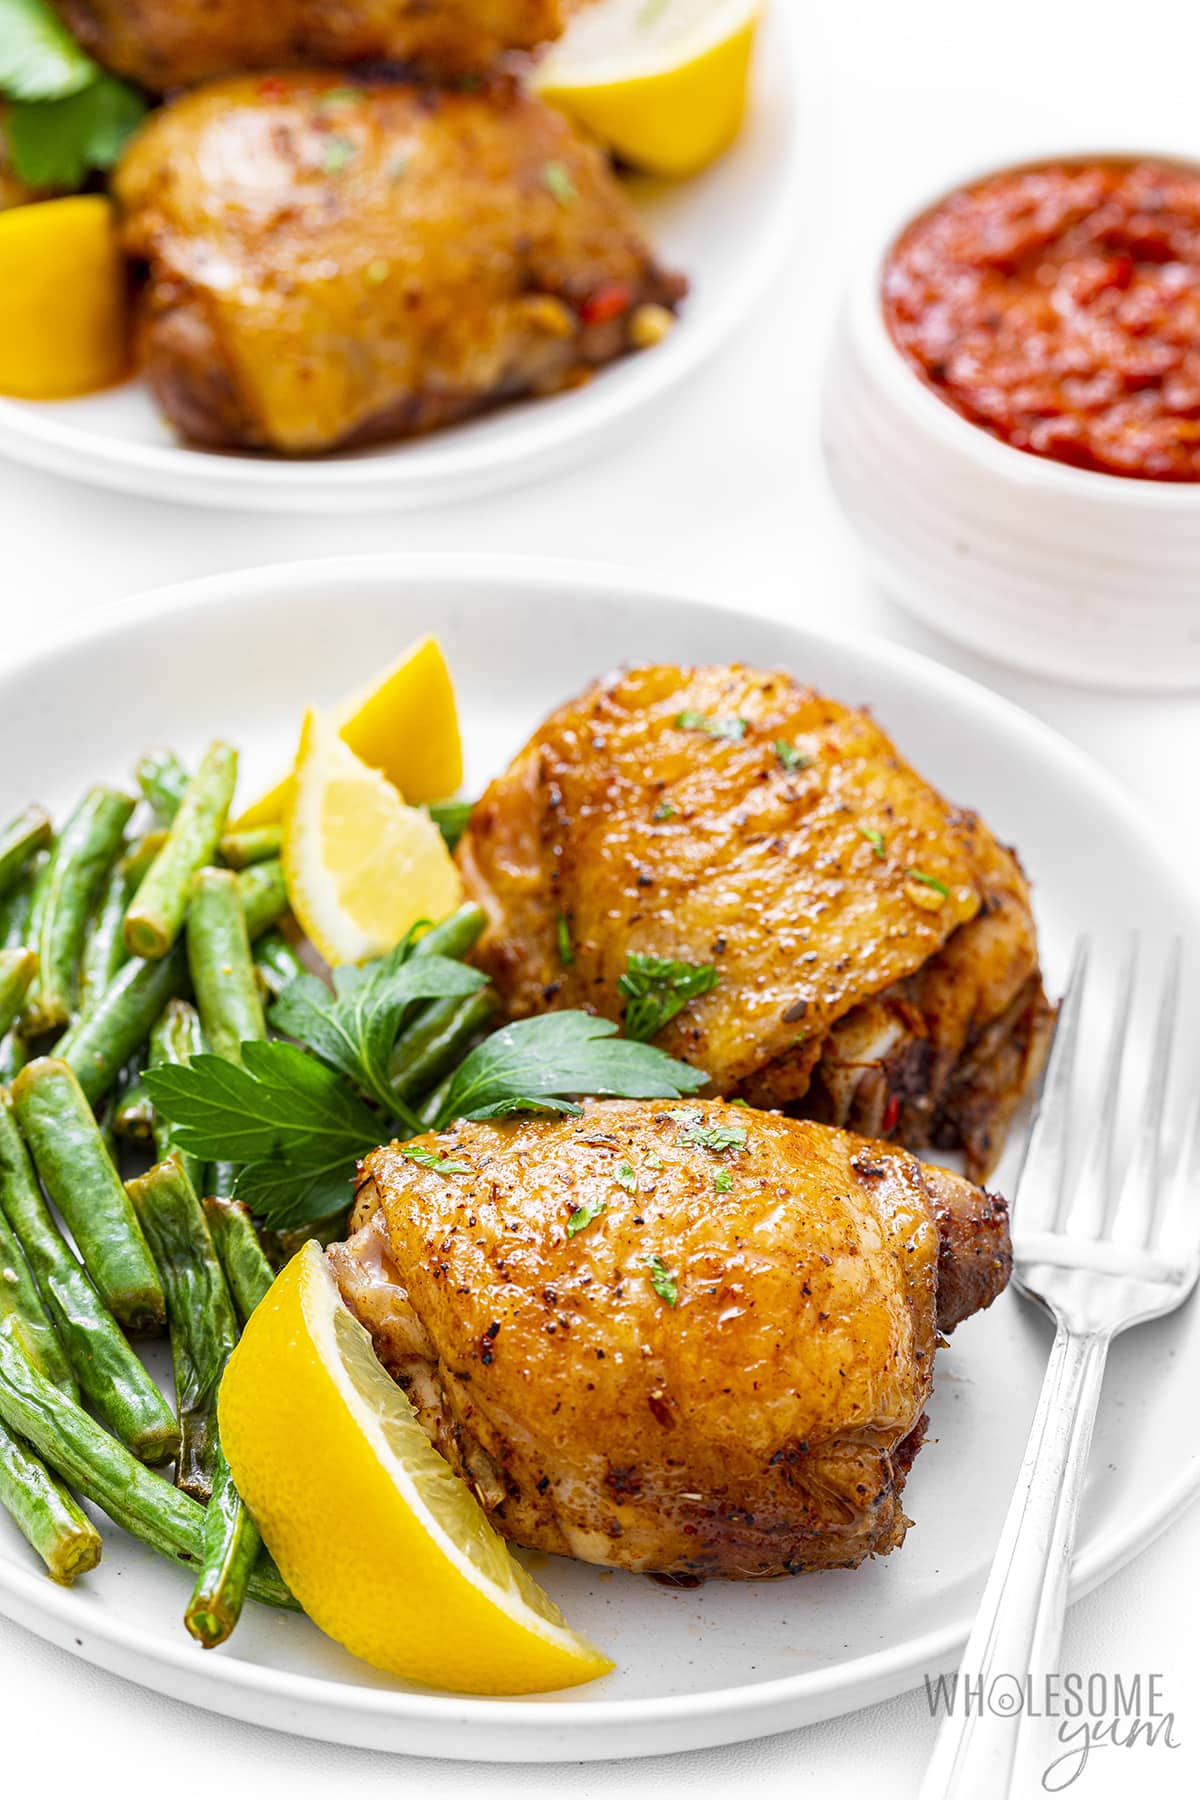 Peri peri chicken recipe on a plate with sauce, green beans, and lemon wedges.